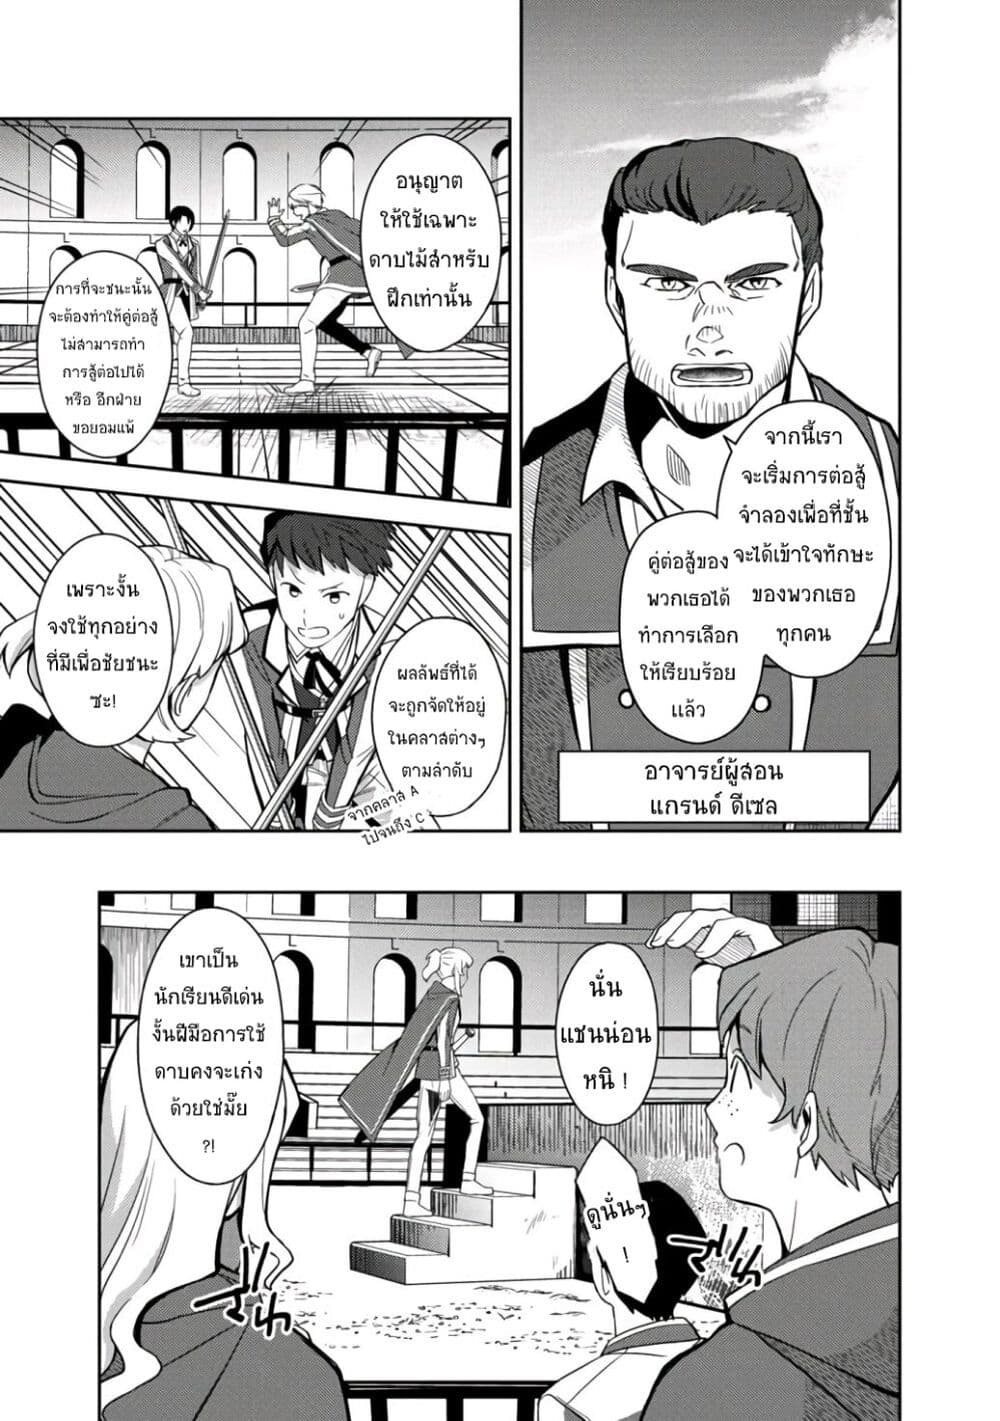 The Reincarnated Swordsman With 9999 Strength Wants to Become a Magician! ตอนที่ 3.1 (6)